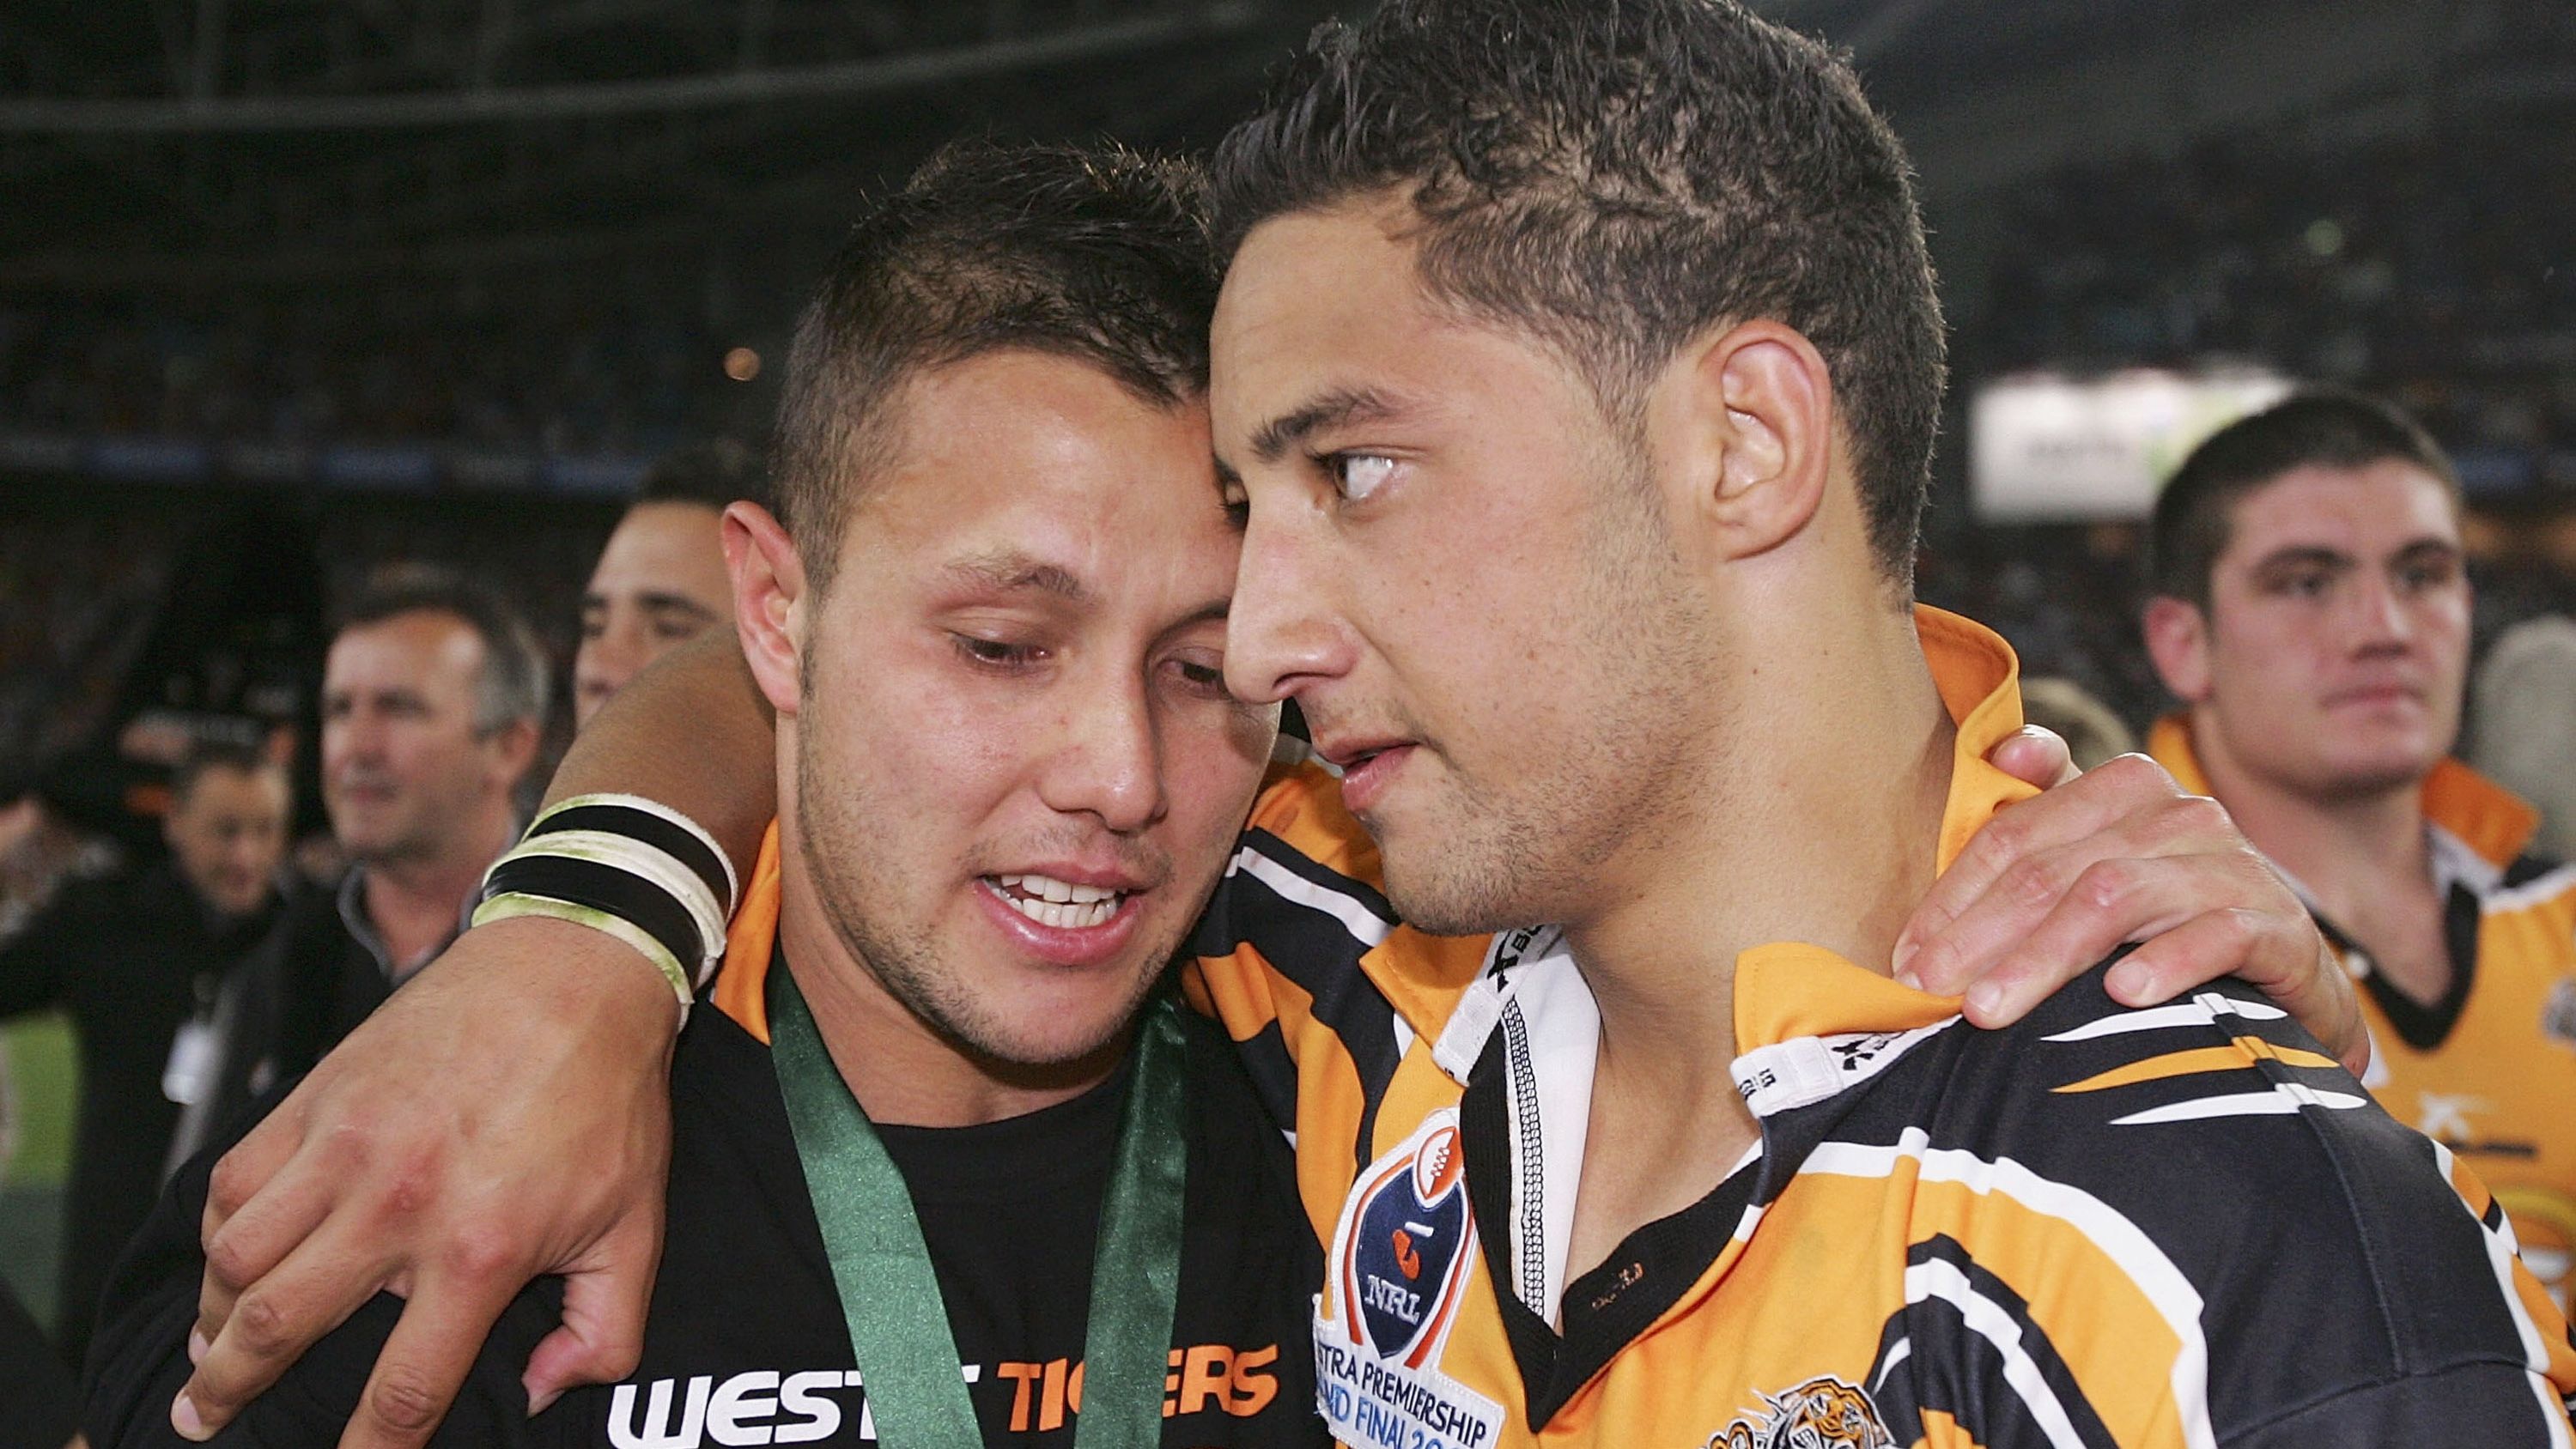 Wests Tigers legend Benji Marshall signs mega-deal to coach struggling club